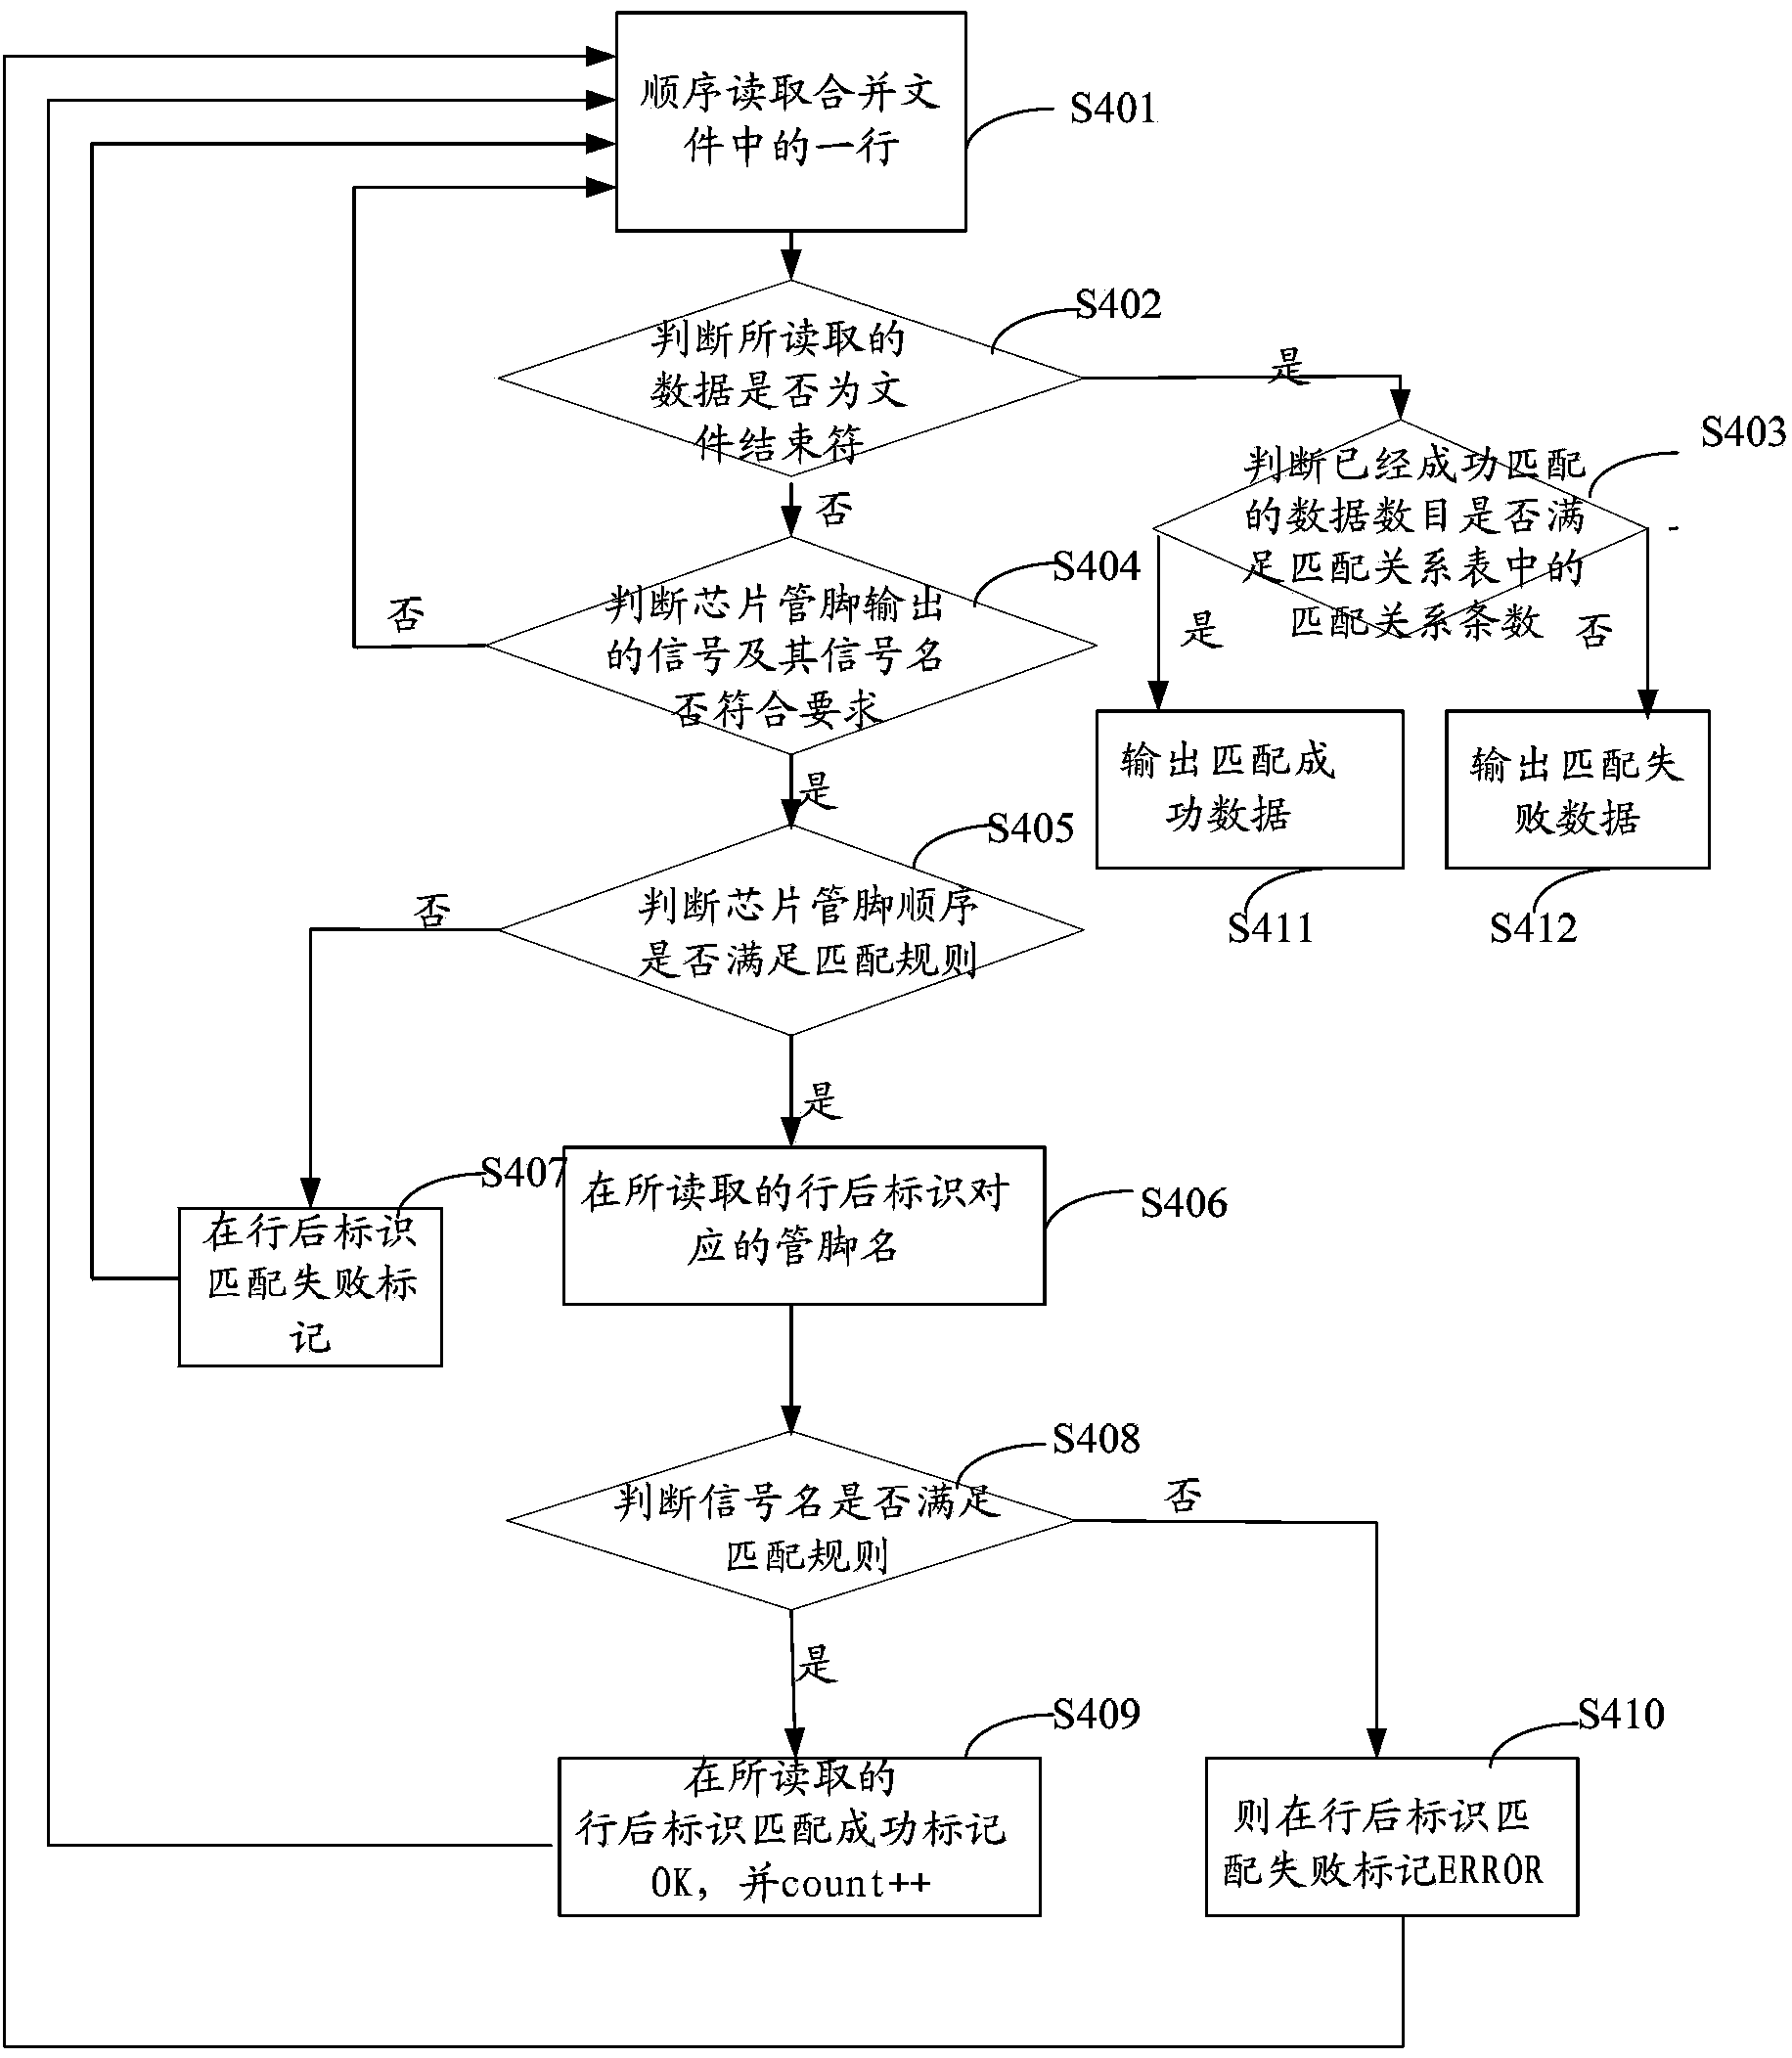 Chip pin connection relation detection method and system